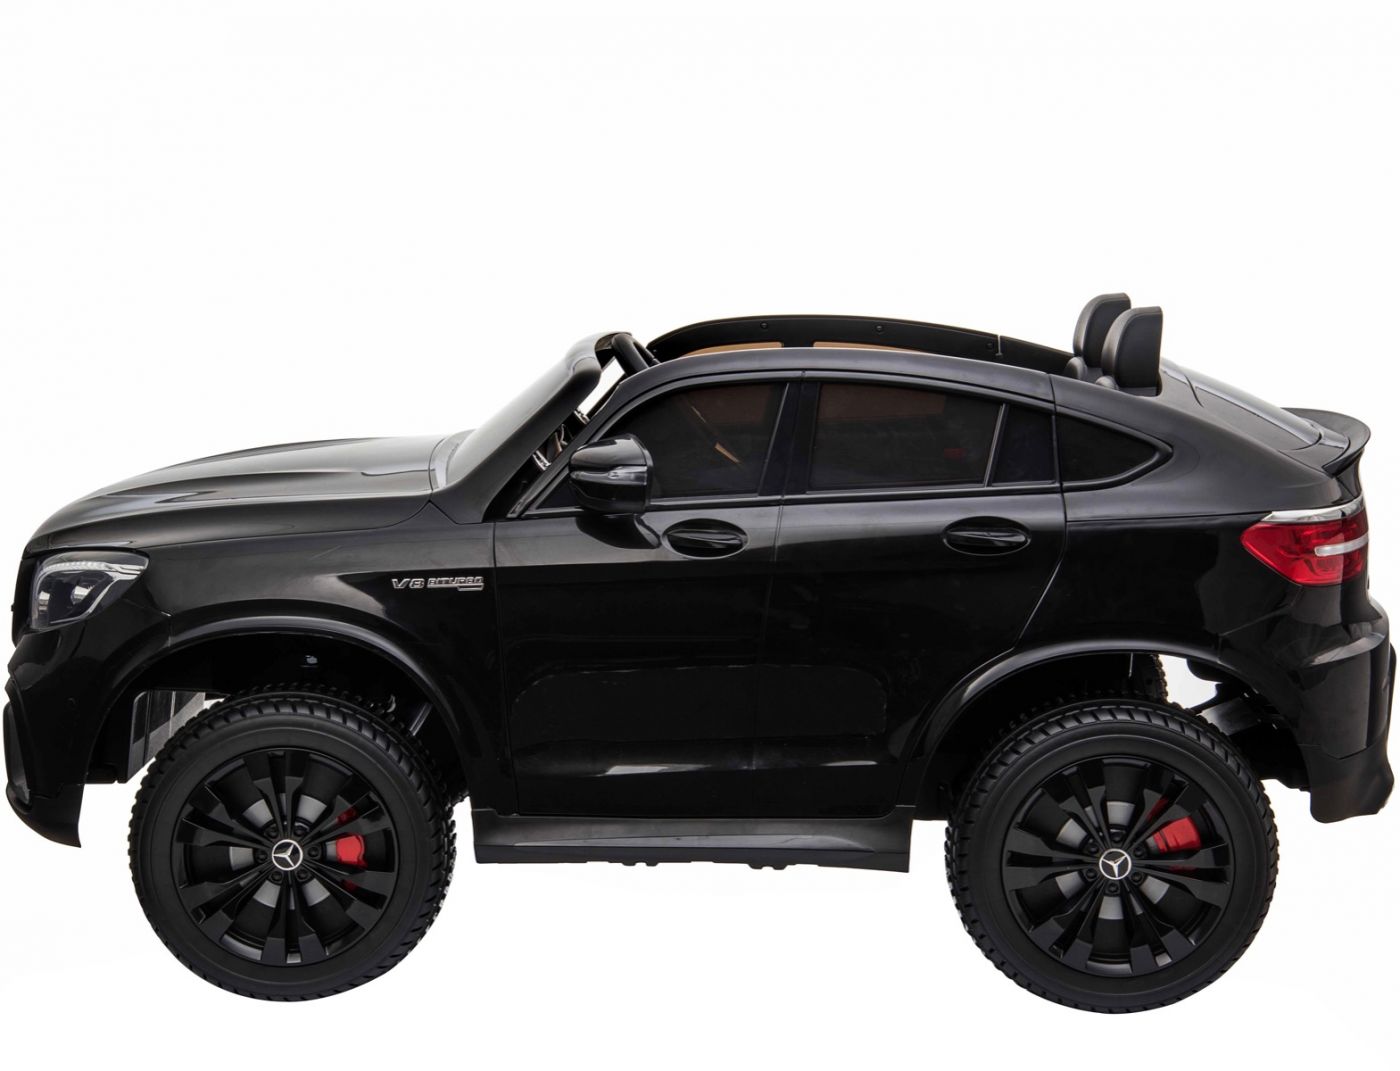 Black Mercedes AMG GLC63 S Coupe 2 Seater toy car for kids with oversized wheels on a white background, suitable for use under adult supervision